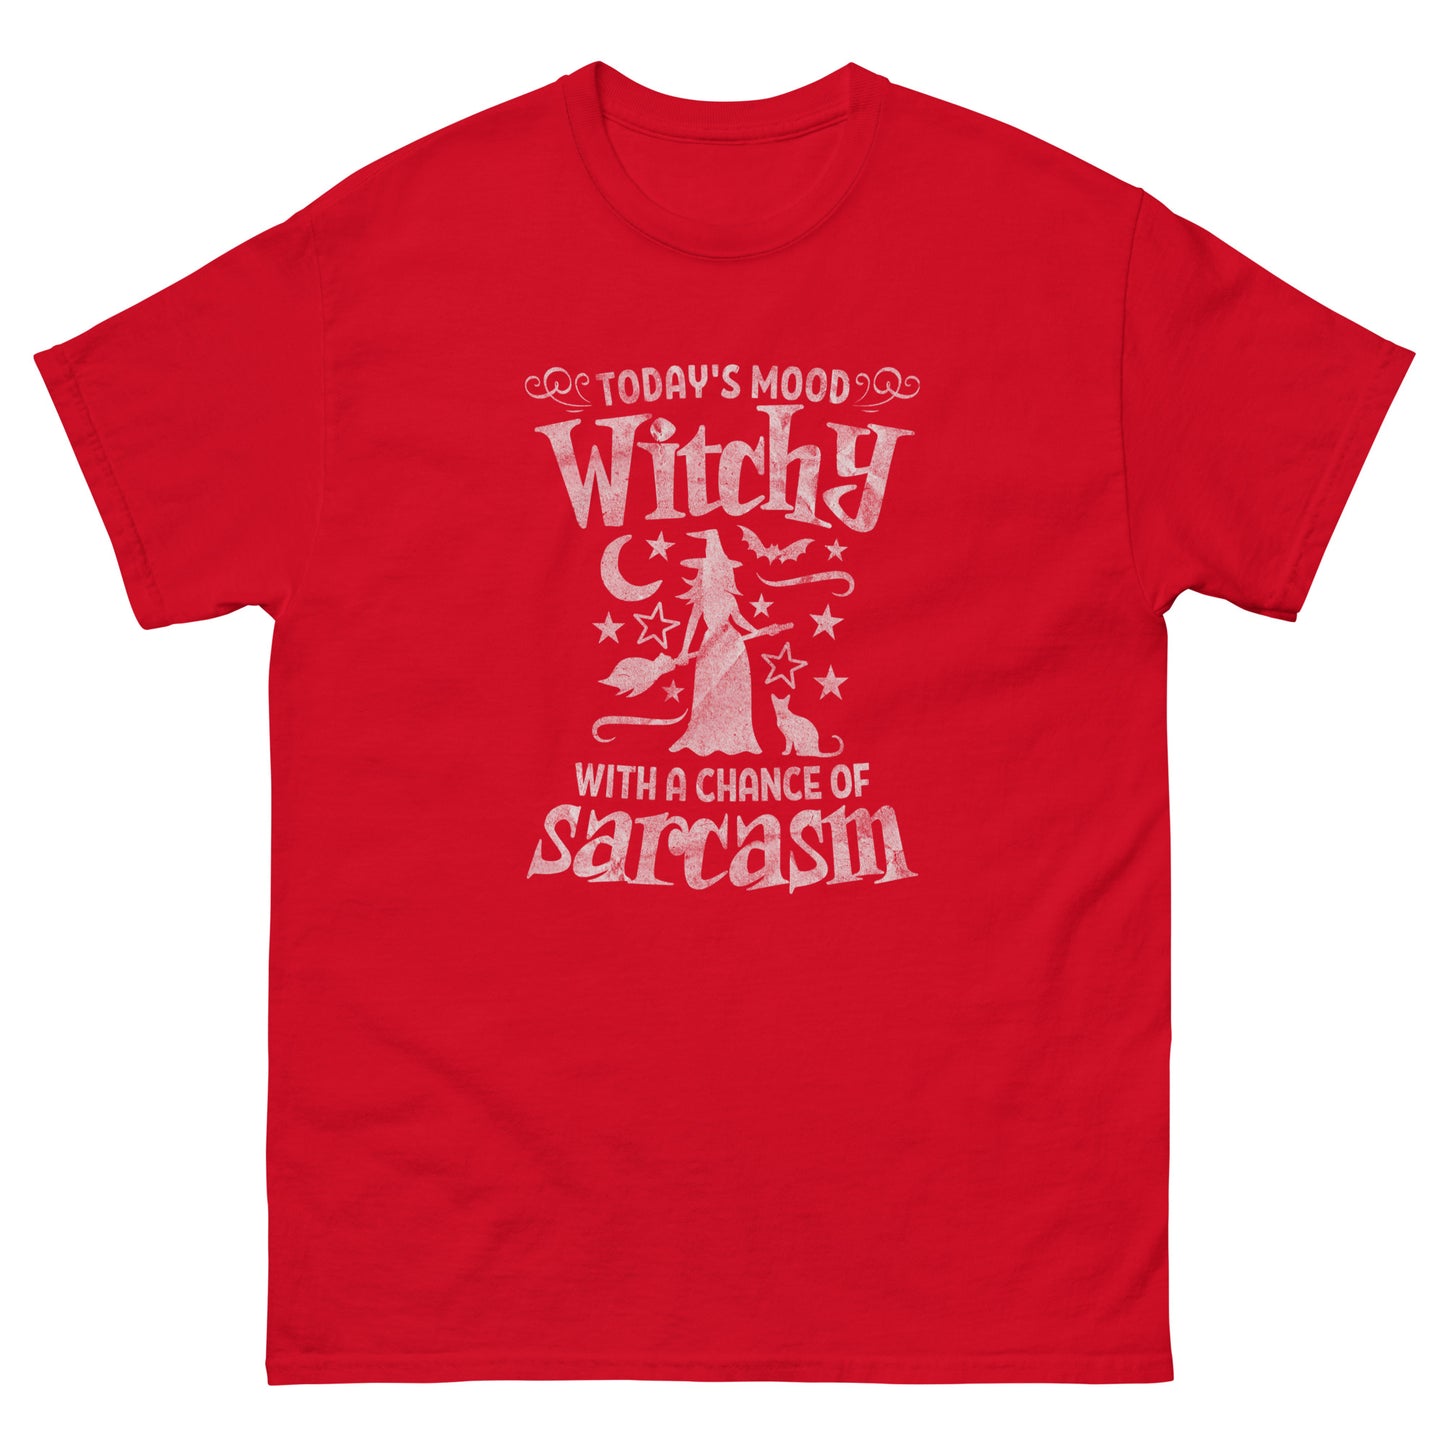 Witchy Sarcasm Tee